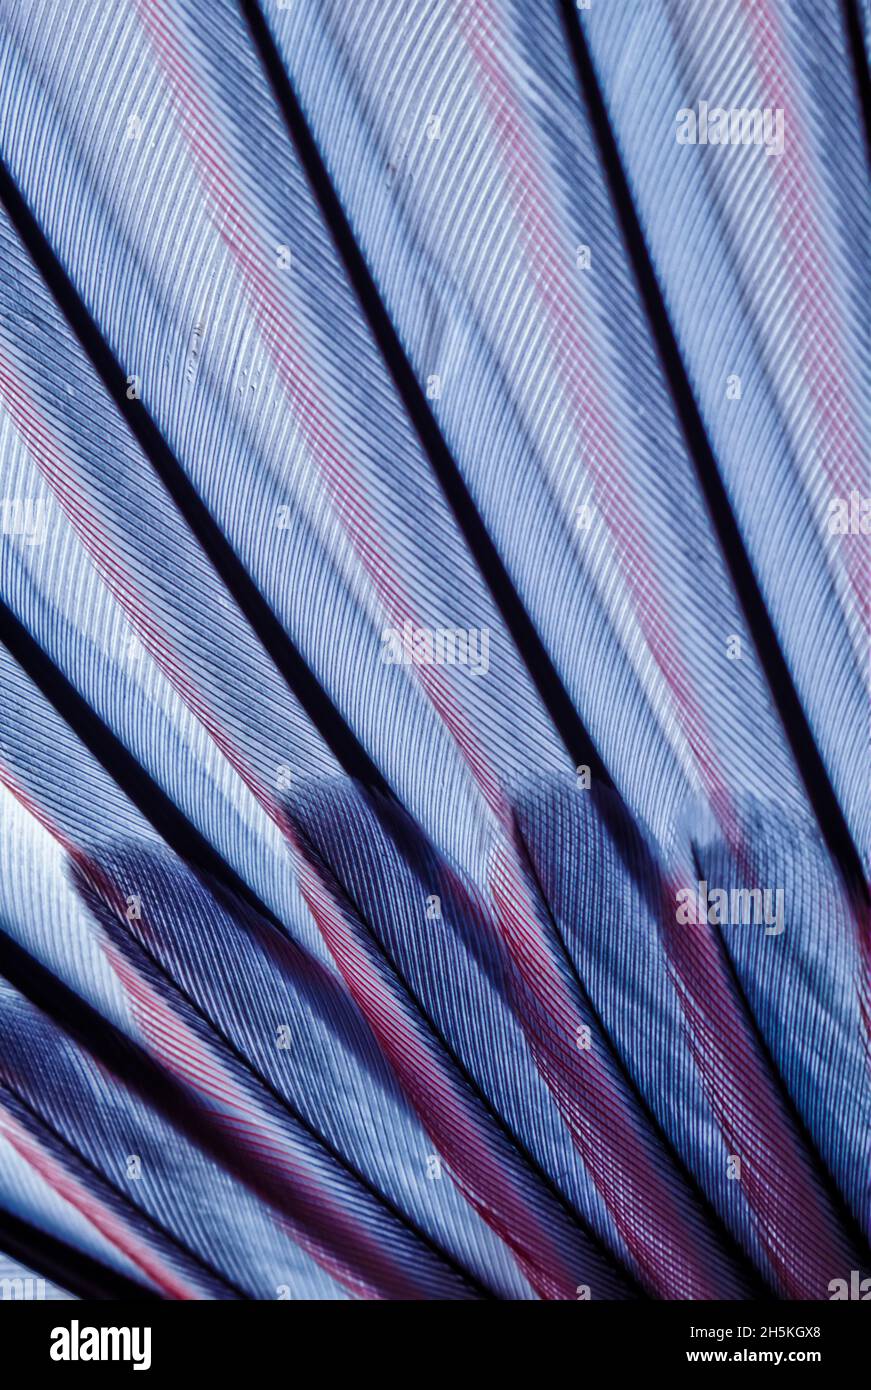 Detail of the primary wing feathers and coverts of a black-chinned sparrow (Spizella atrogularis). The main stem of each feather is called a rachis... Stock Photo